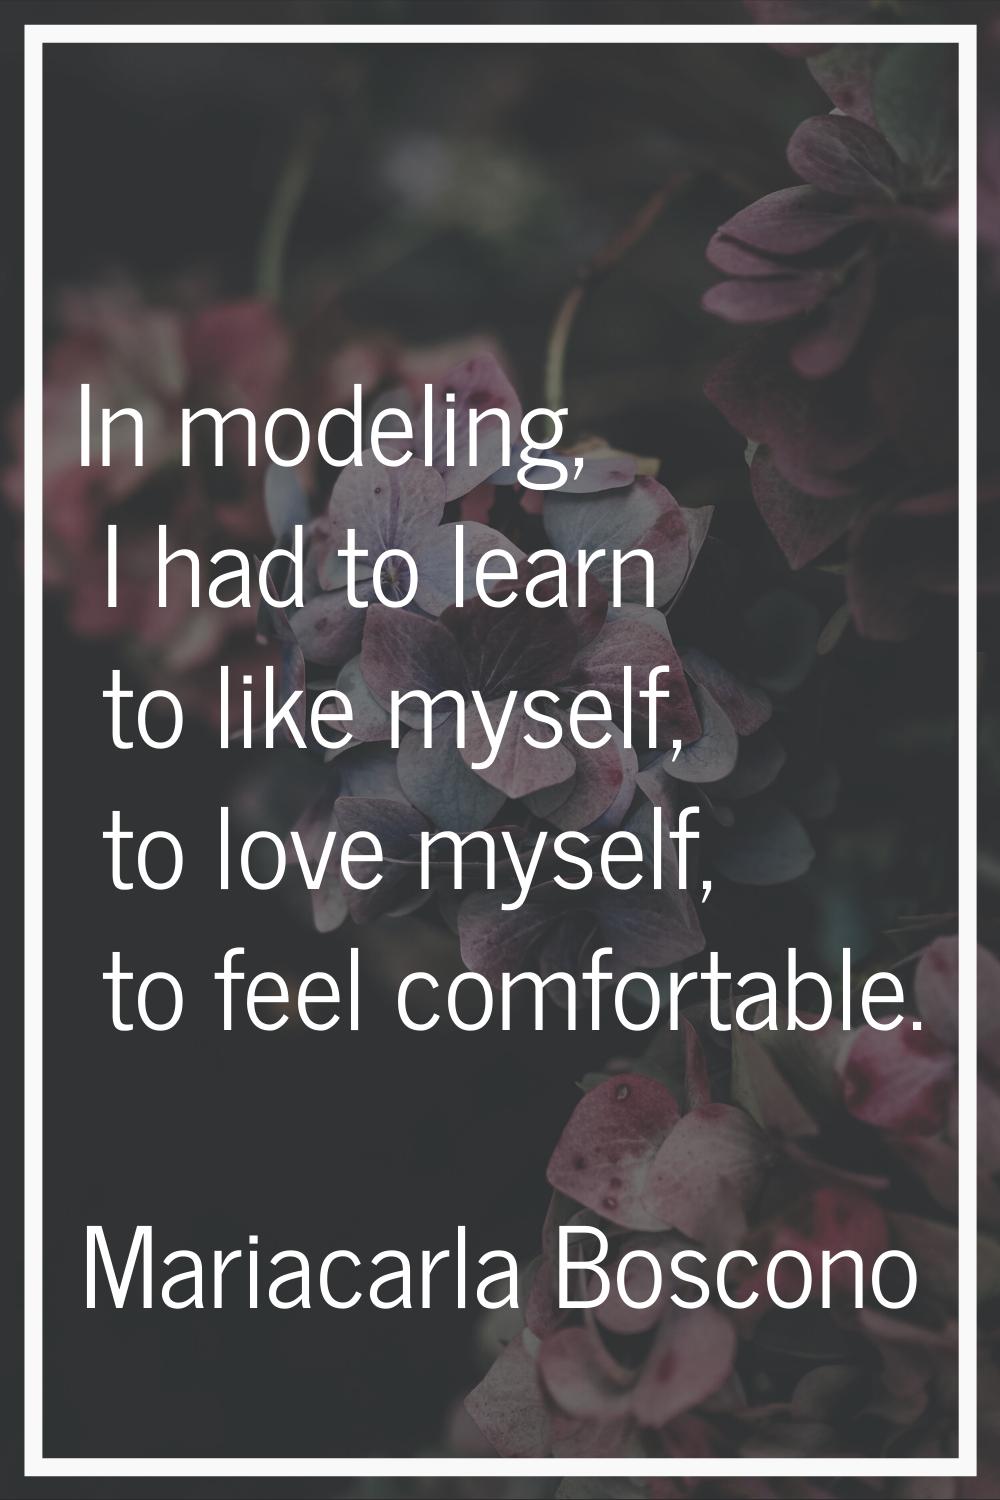 In modeling, I had to learn to like myself, to love myself, to feel comfortable.